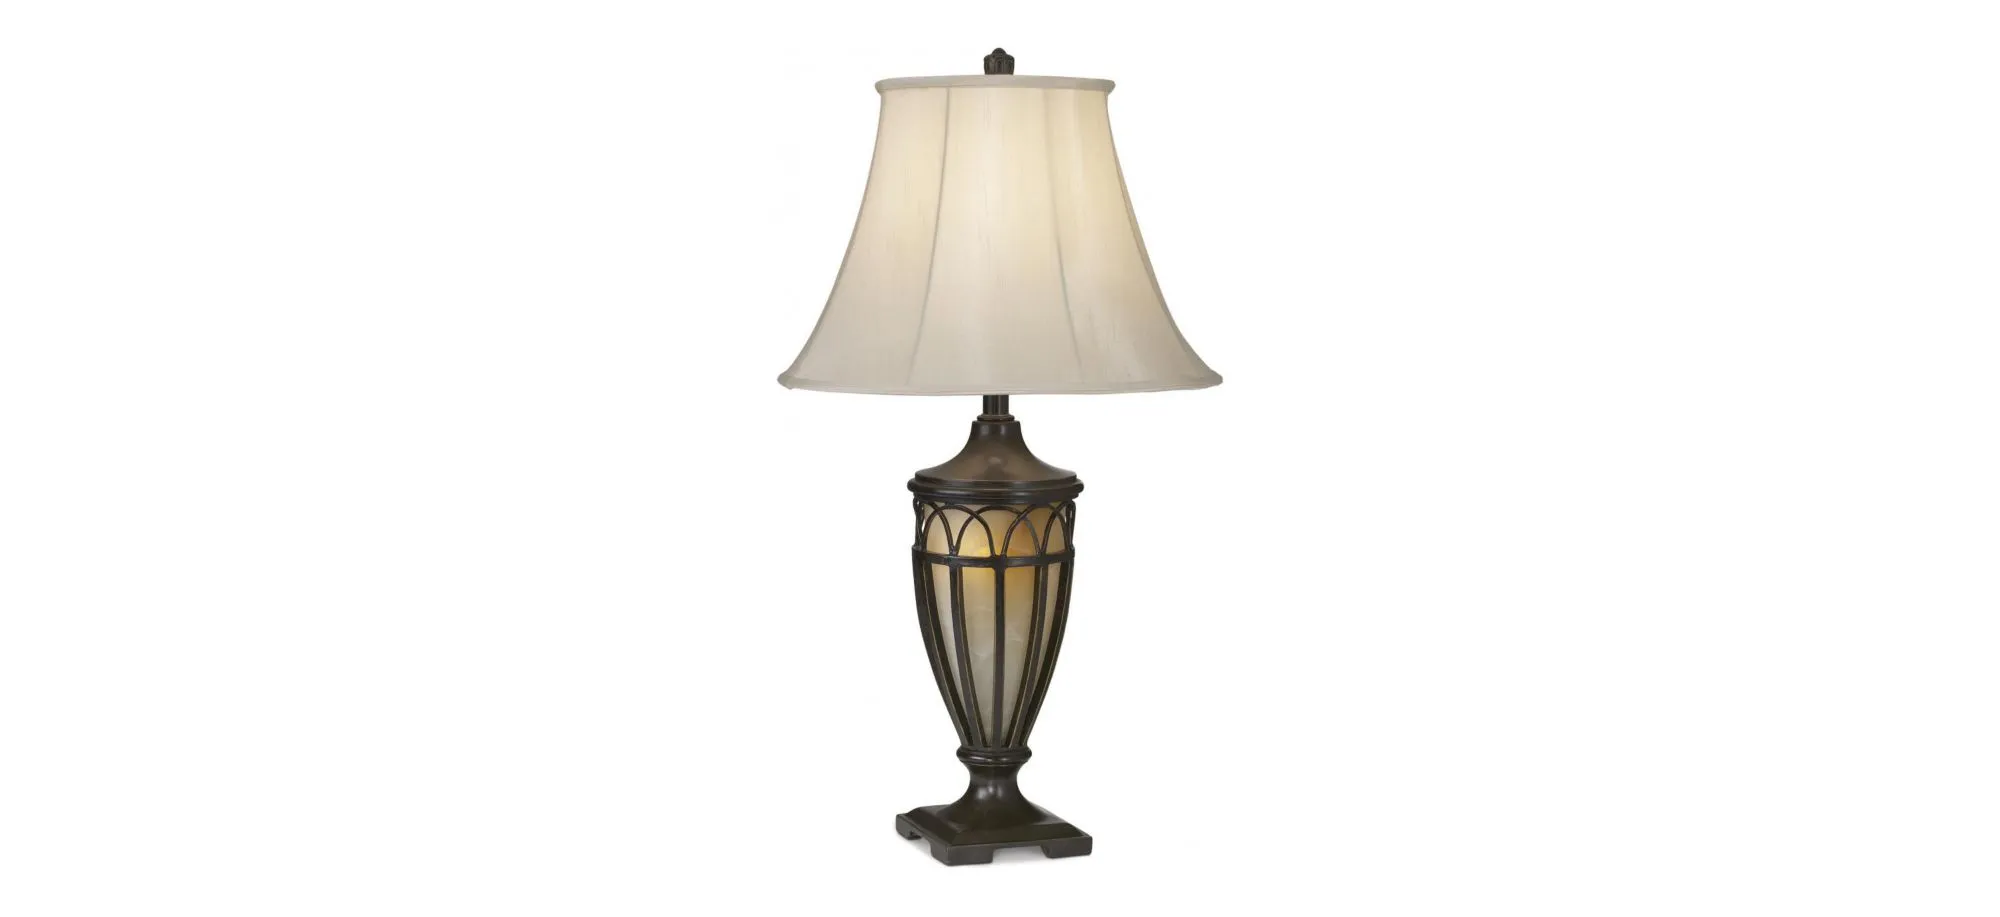 Lexington Table Lamp w/ Night-Light in Bronze / Gold by Pacific Coast